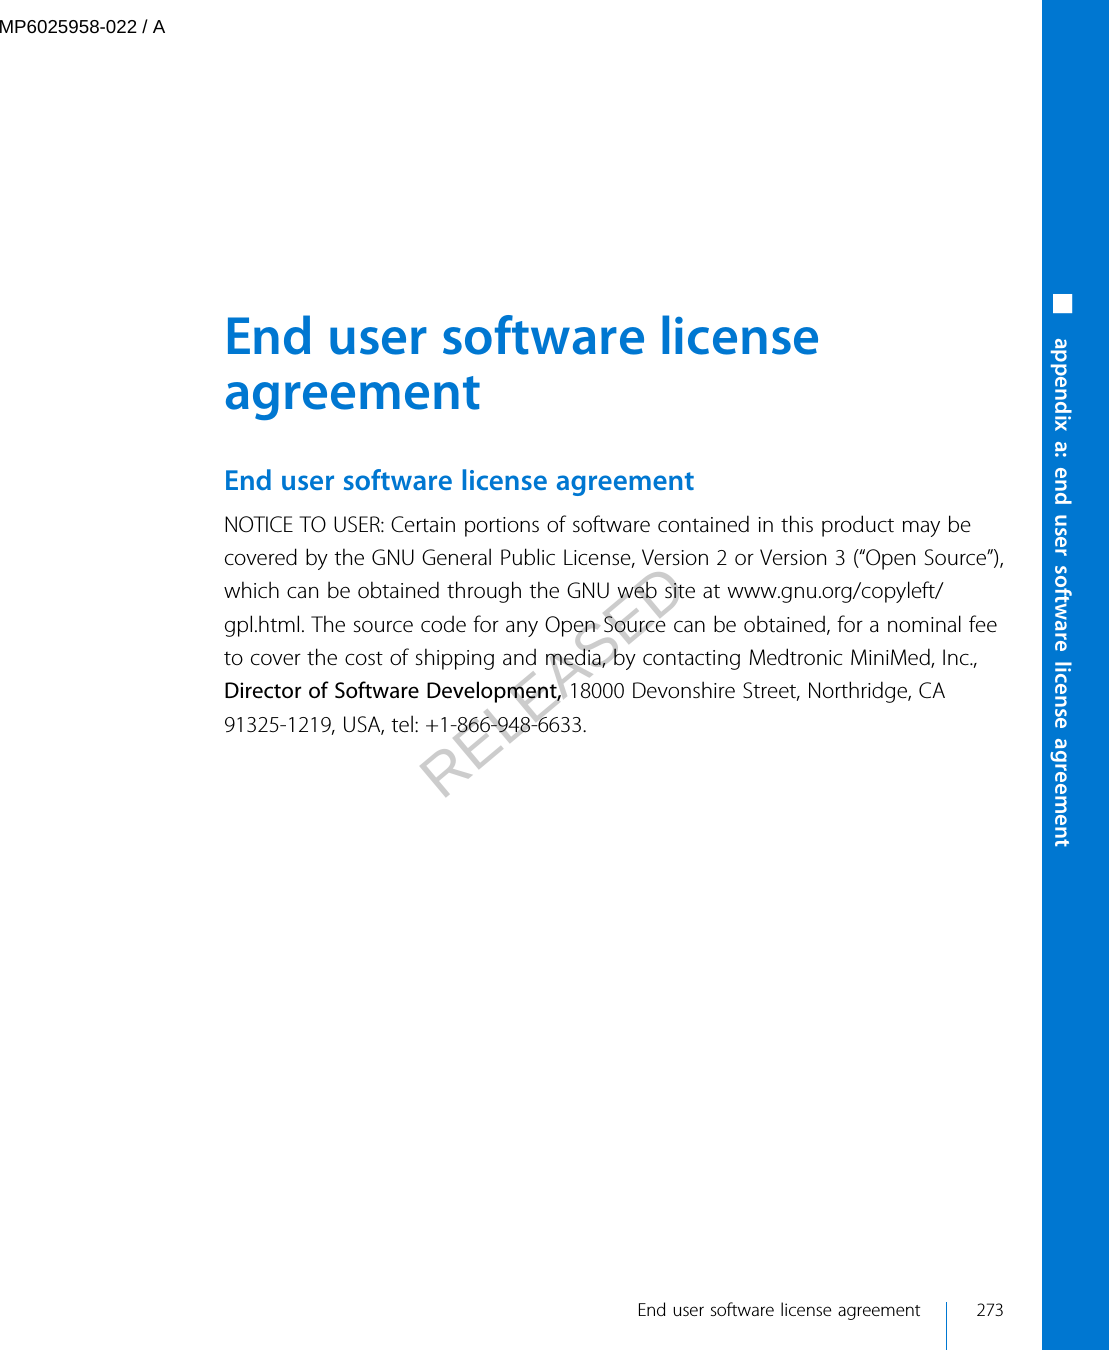  End user software licenseagreementEnd user software license agreementNOTICE TO USER: Certain portions of software contained in this product may becovered by the GNU General Public License, Version 2 or Version 3 (“Open Source”),which can be obtained through the GNU web site at www.gnu.org/copyleft/gpl.html. The source code for any Open Source can be obtained, for a nominal feeto cover the cost of shipping and media, by contacting Medtronic MiniMed, Inc.,Director of Software Development, 18000 Devonshire Street, Northridge, CA91325-1219, USA, tel: +1-866-948-6633. End user software license agreement 273■ appendix a: end user software license agreementMP6025958-022 / ARELEASED